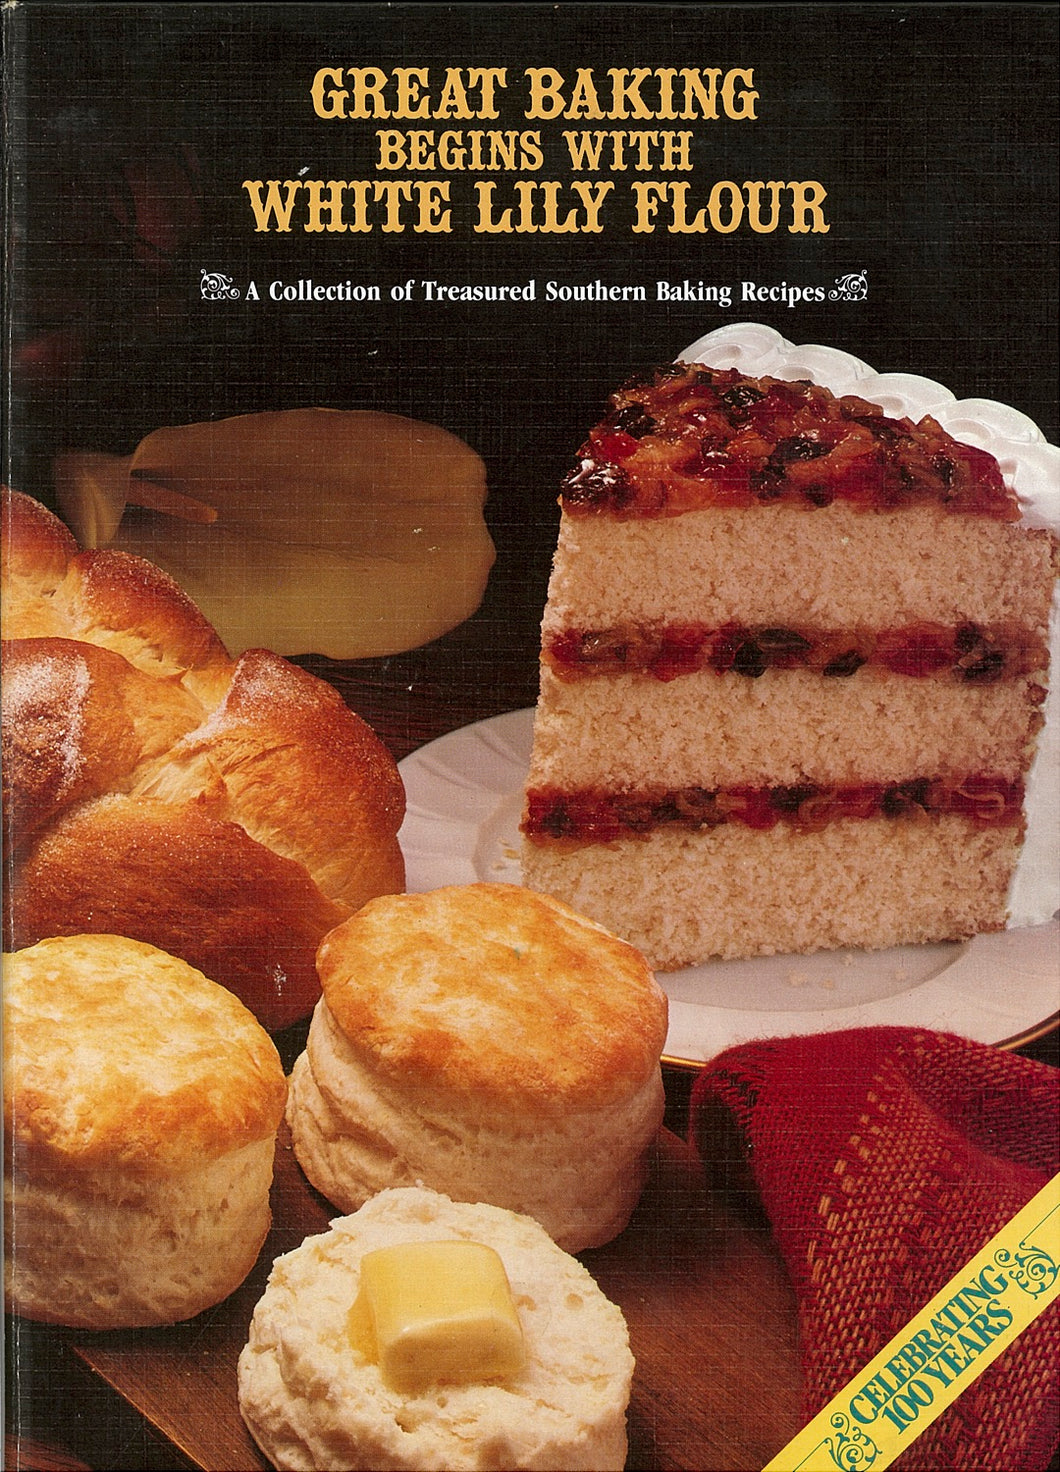 Great Baking Begins with White Lily Flour (1982)